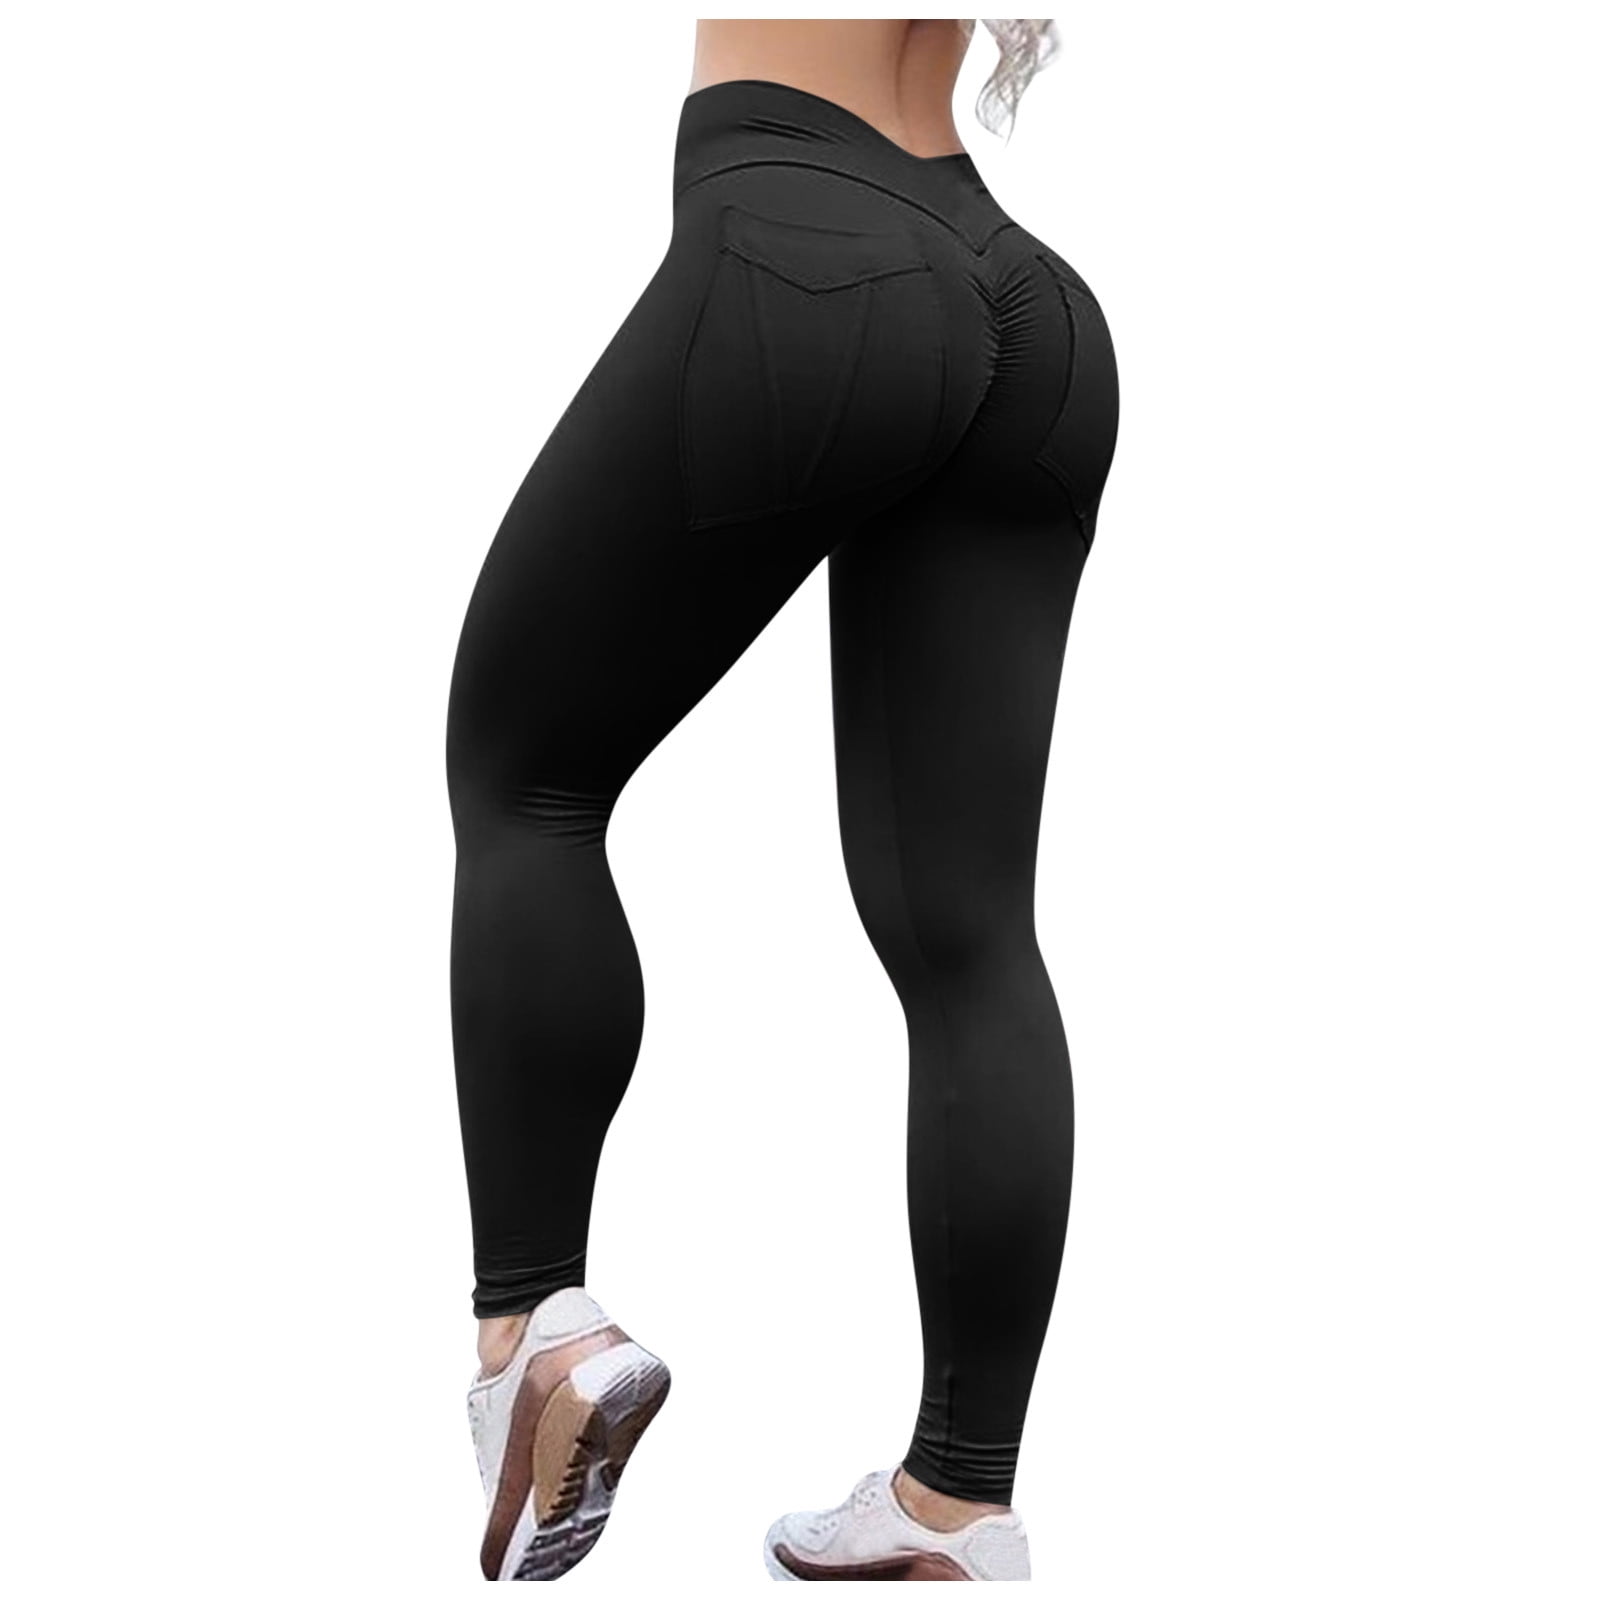 NonToxic Activewear Guide Forever Chemicals in Workout Leggings